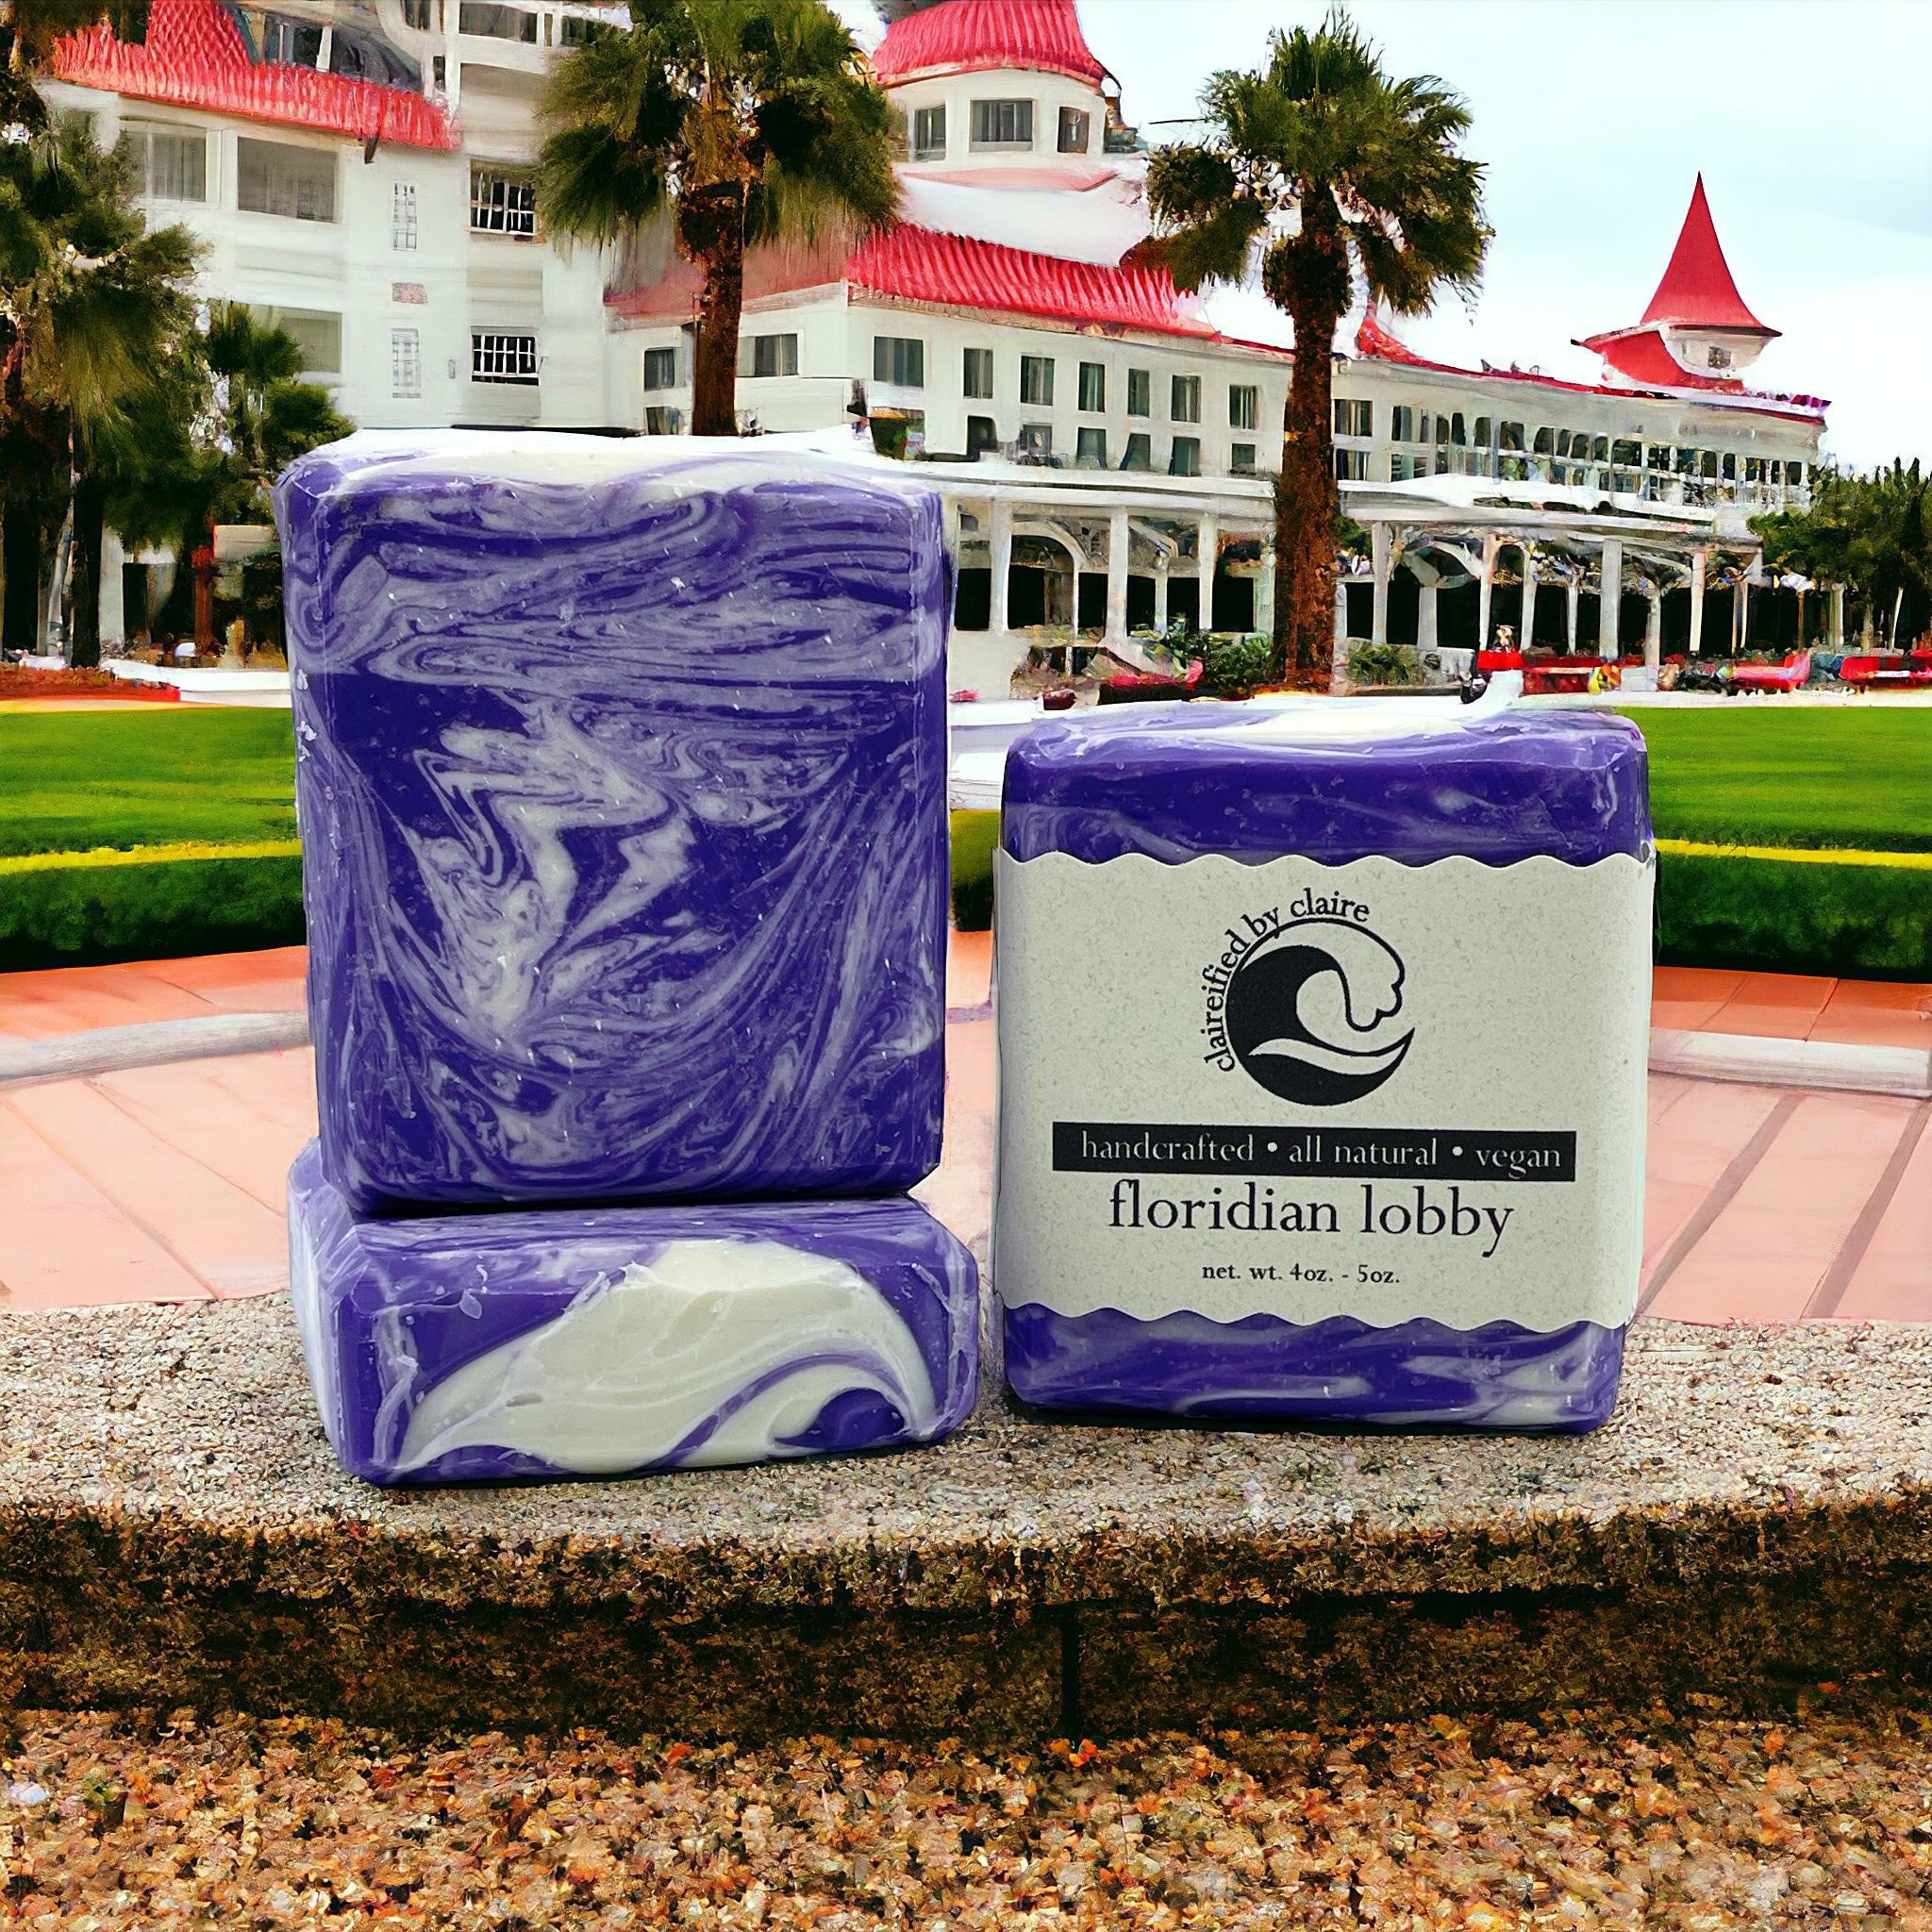 Floridian Lobby handmade soap inspired by Disney's Grand Floridian Resort.